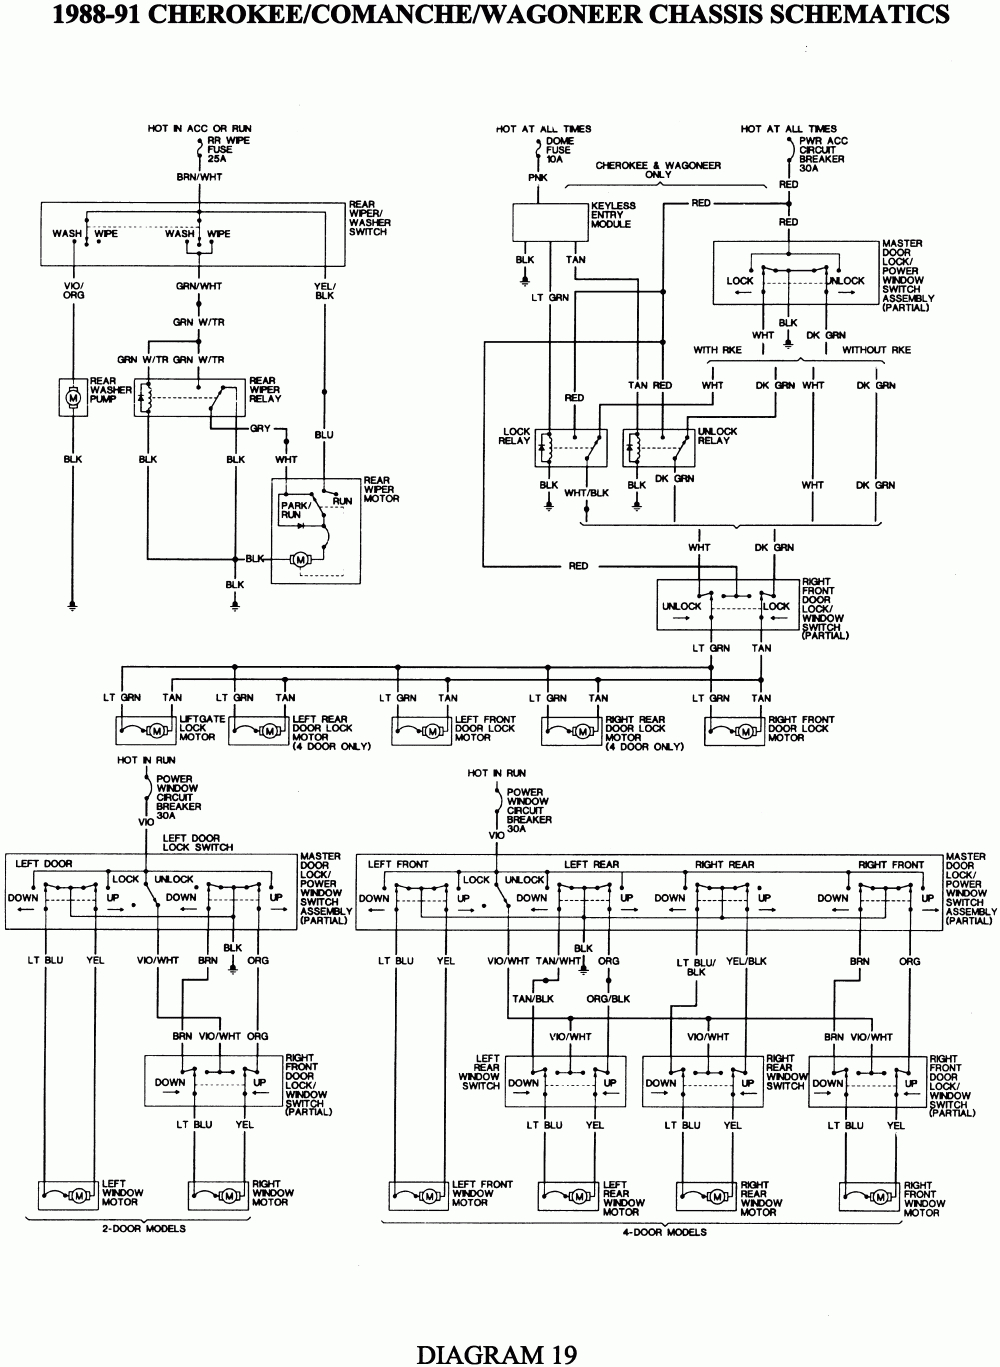 2000 Jeep Cherokee Wiring Schematic - Wiring Diagrams Hubs - 2000 Jeep Cherokee Wiring Diagram